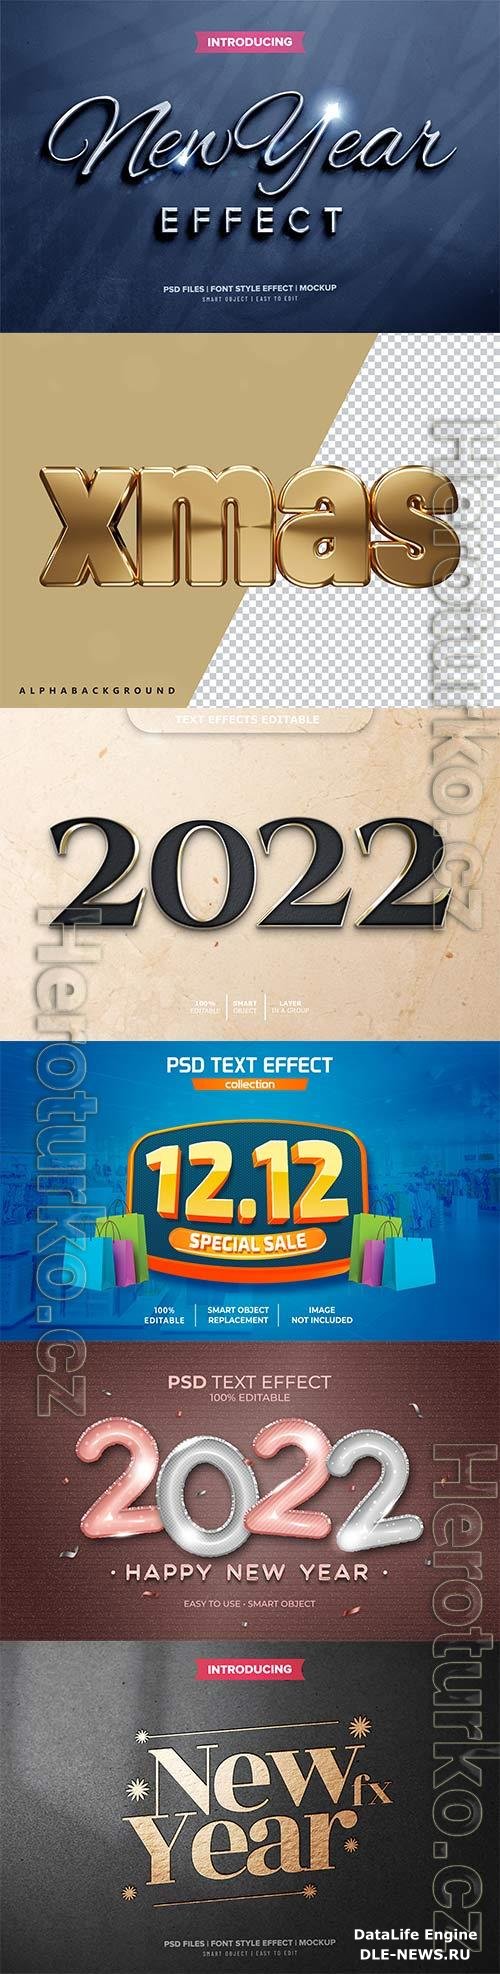 2022 new year 3d rendering isolated psd